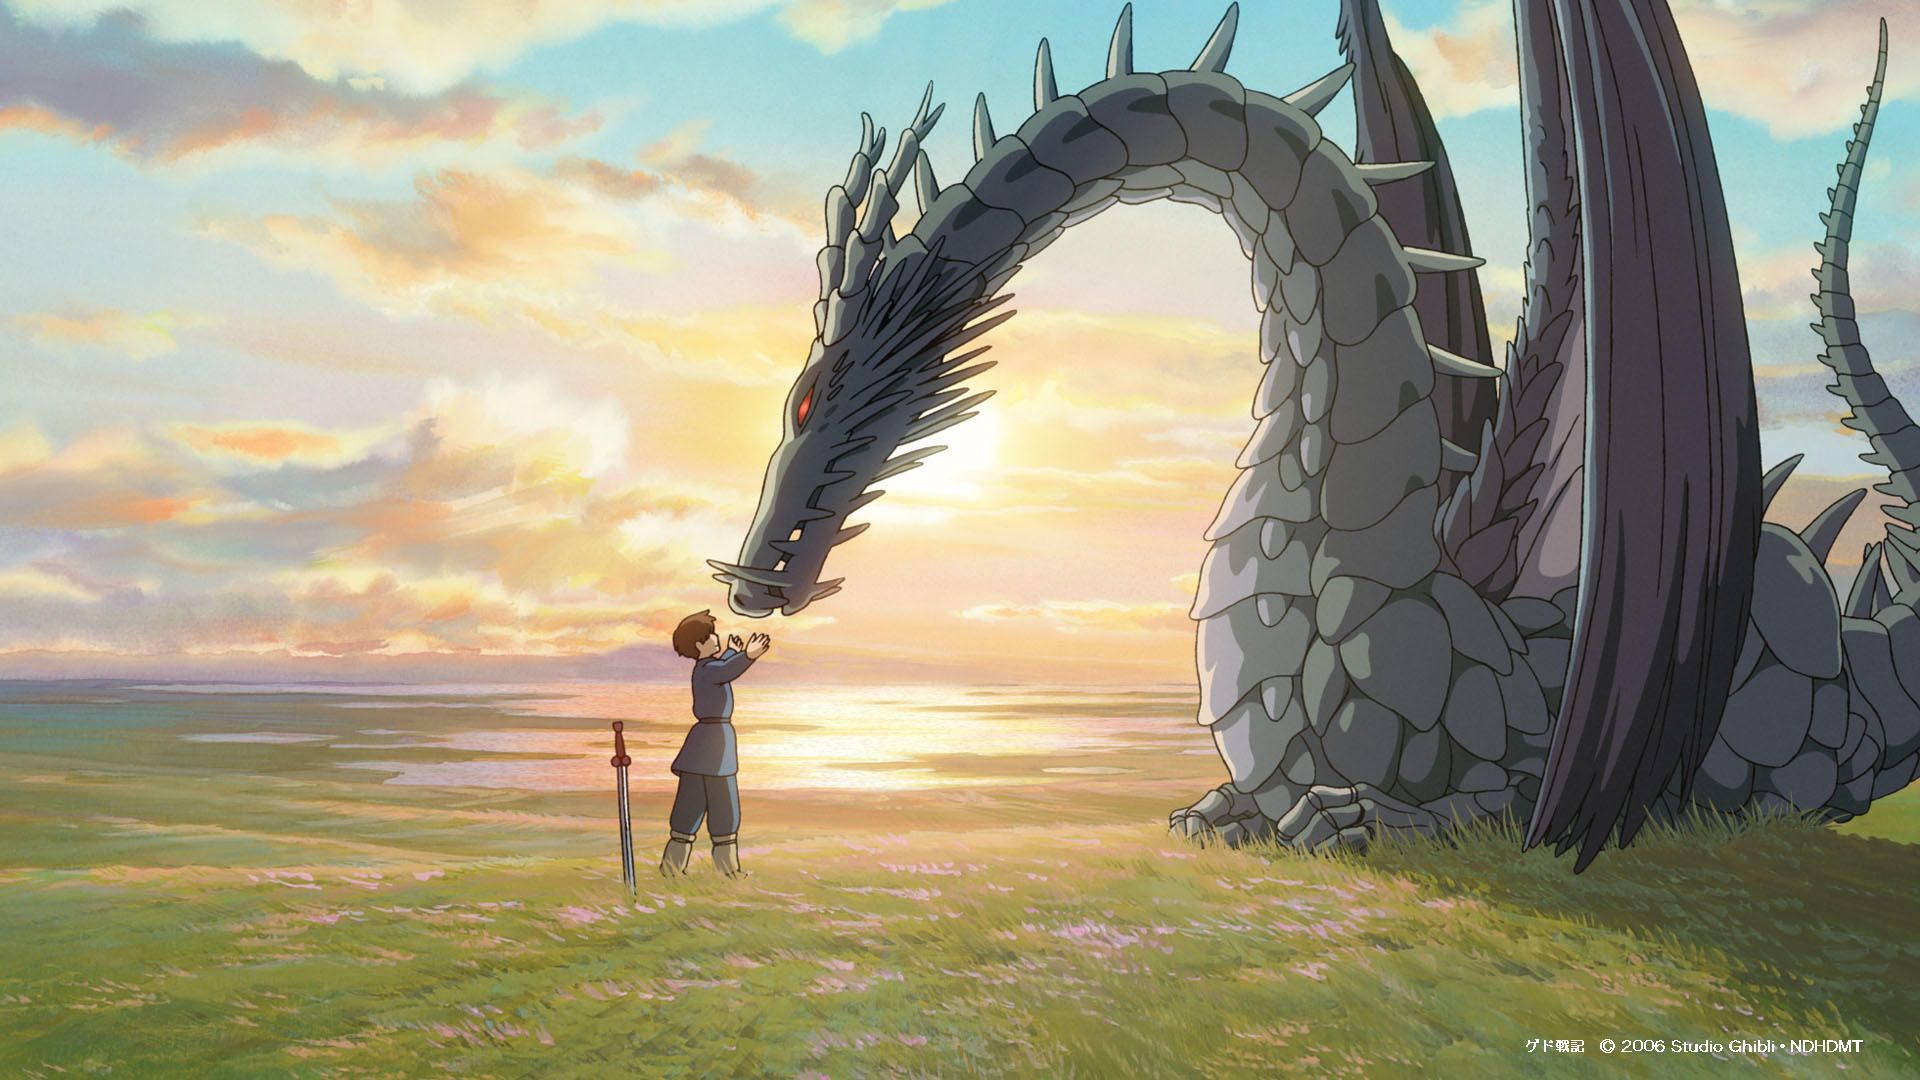 Download free Studio Ghibli wallpaper for your video chats and meetings